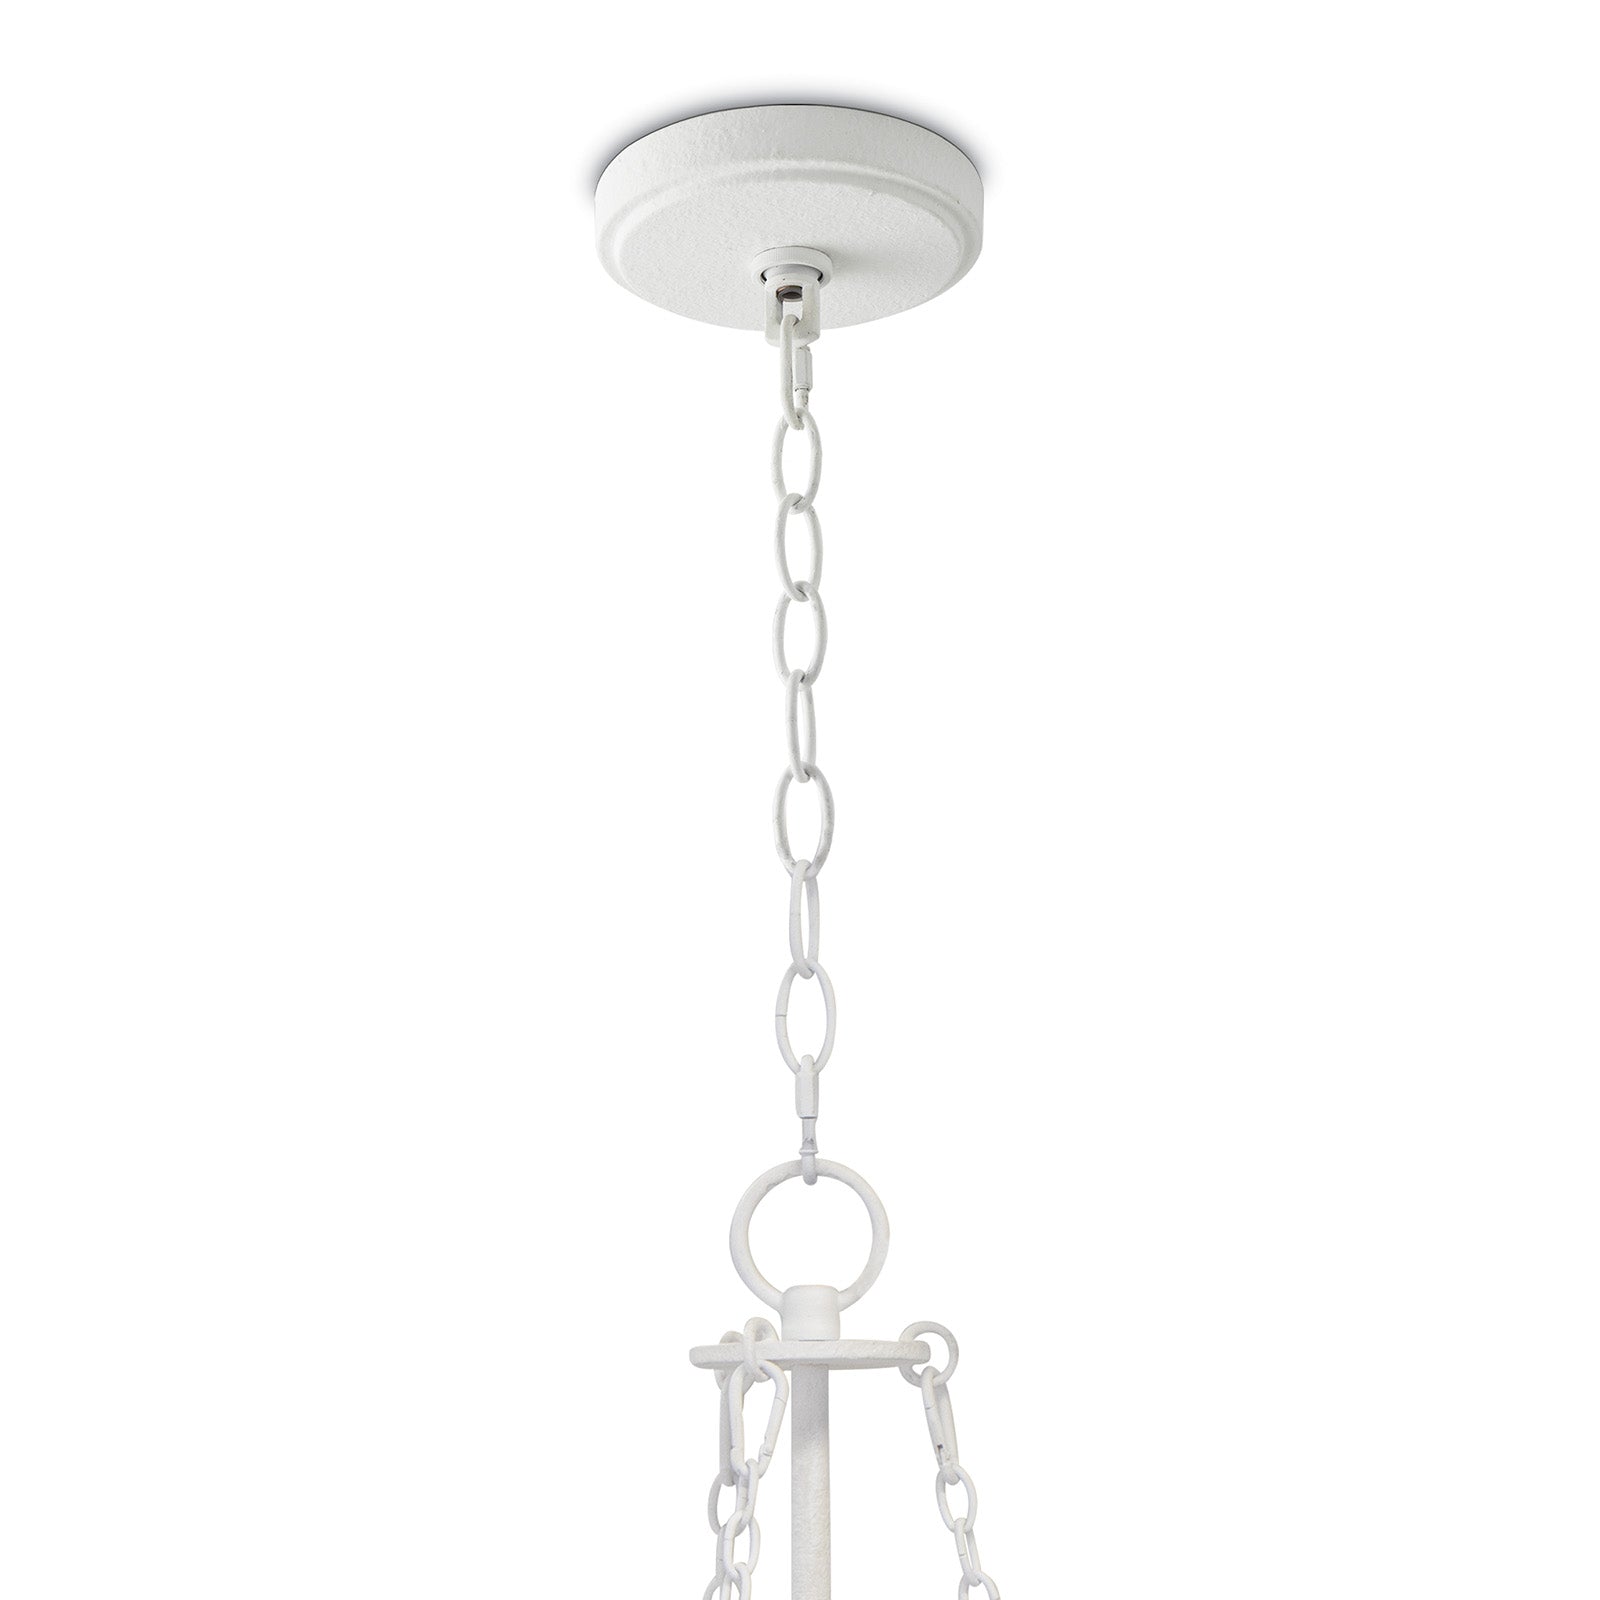 River Reed Basin Chandelier in White by Regina Andrew